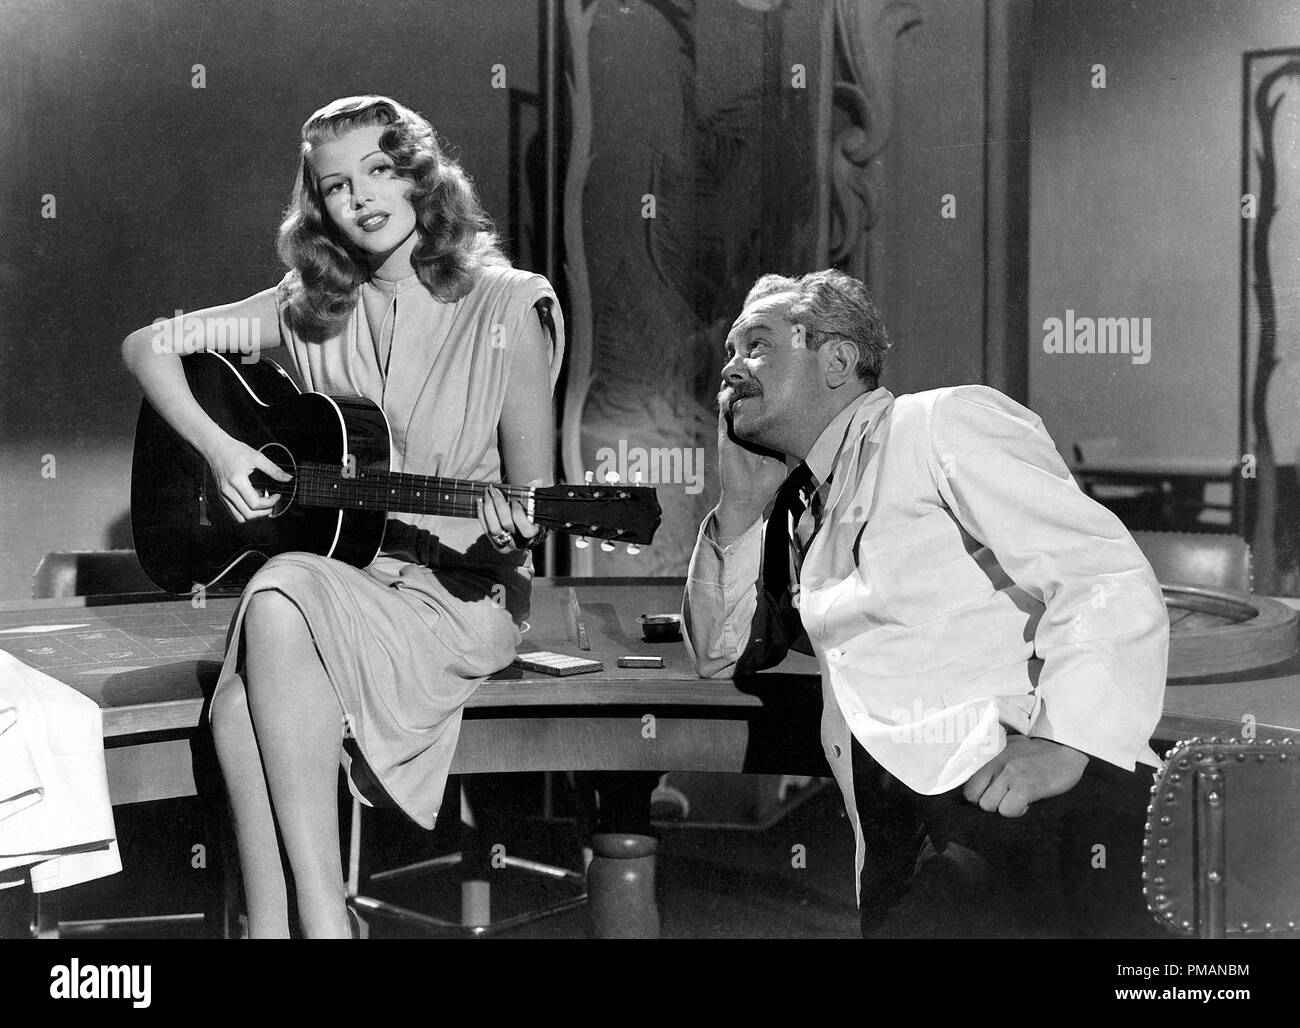 Film Still/Publicity Still of 'Gilda' Rita Hayworth 1946 Columbia / Cinema Publishers Collection - No Release - For Editorial Use Only File Reference # 33505 497THA Stock Photo